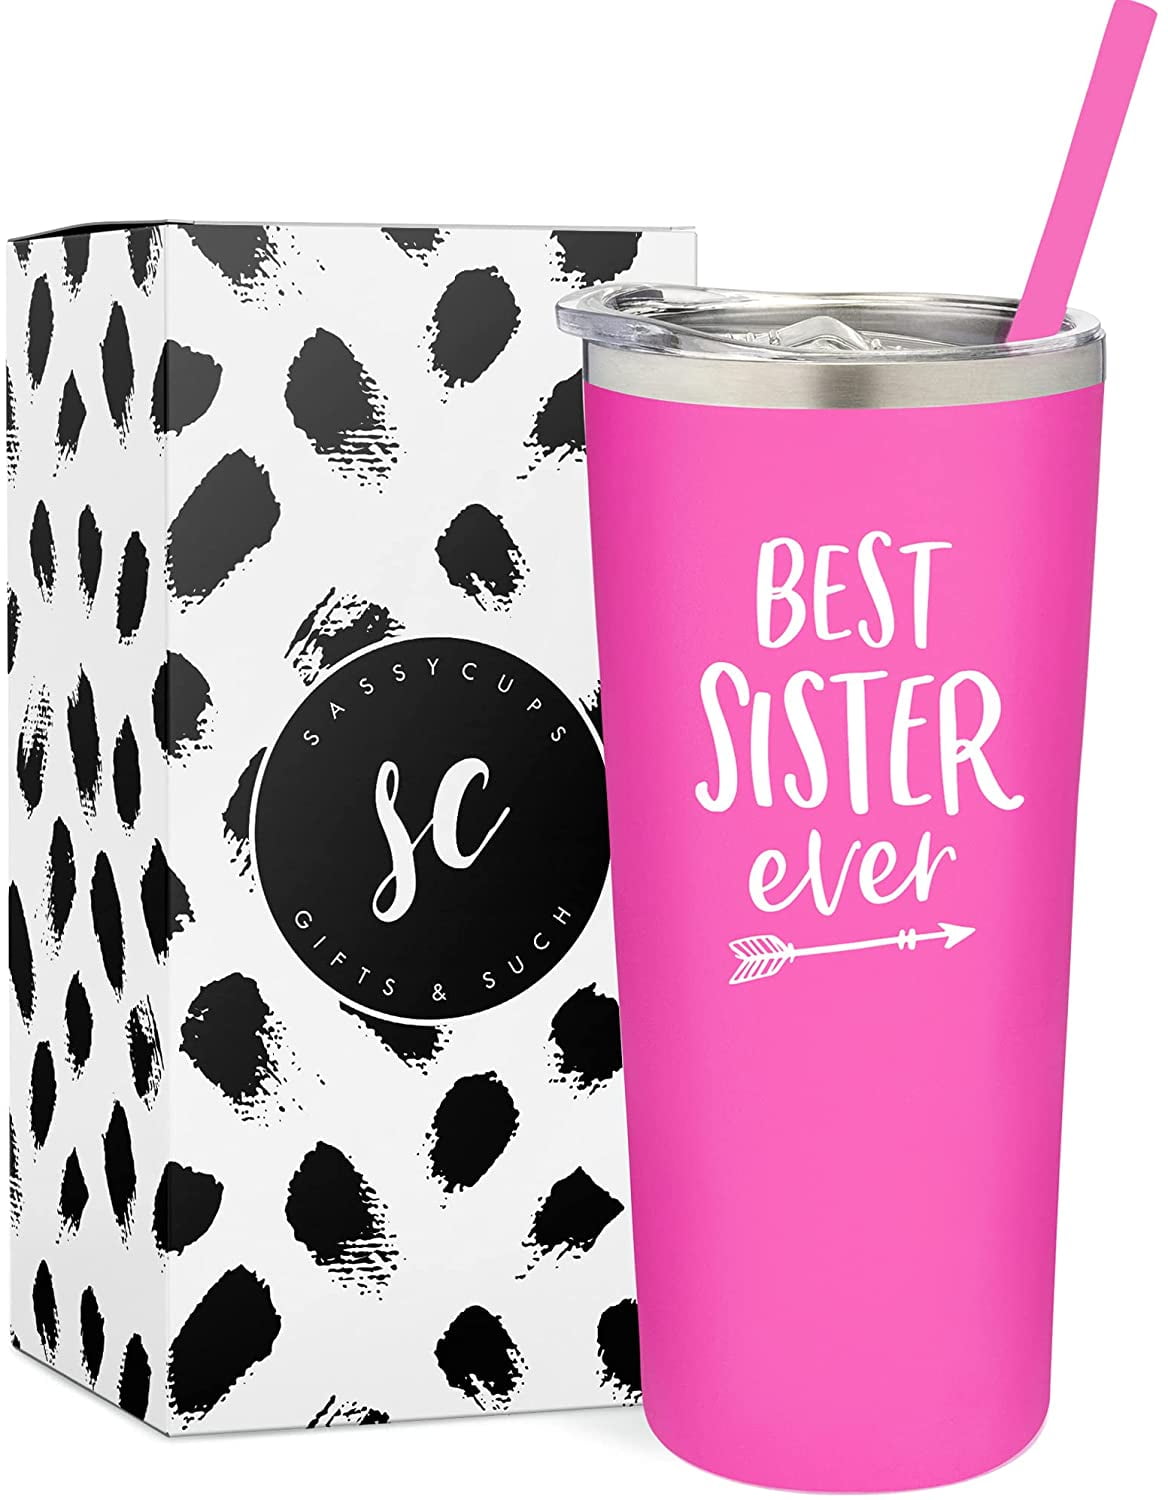 The Best Glass Tumbler Ever - Pink Dolls - In Our Bestie Era (D1) - Gift  For Best Friends, BFF, Sisters, Coworkers